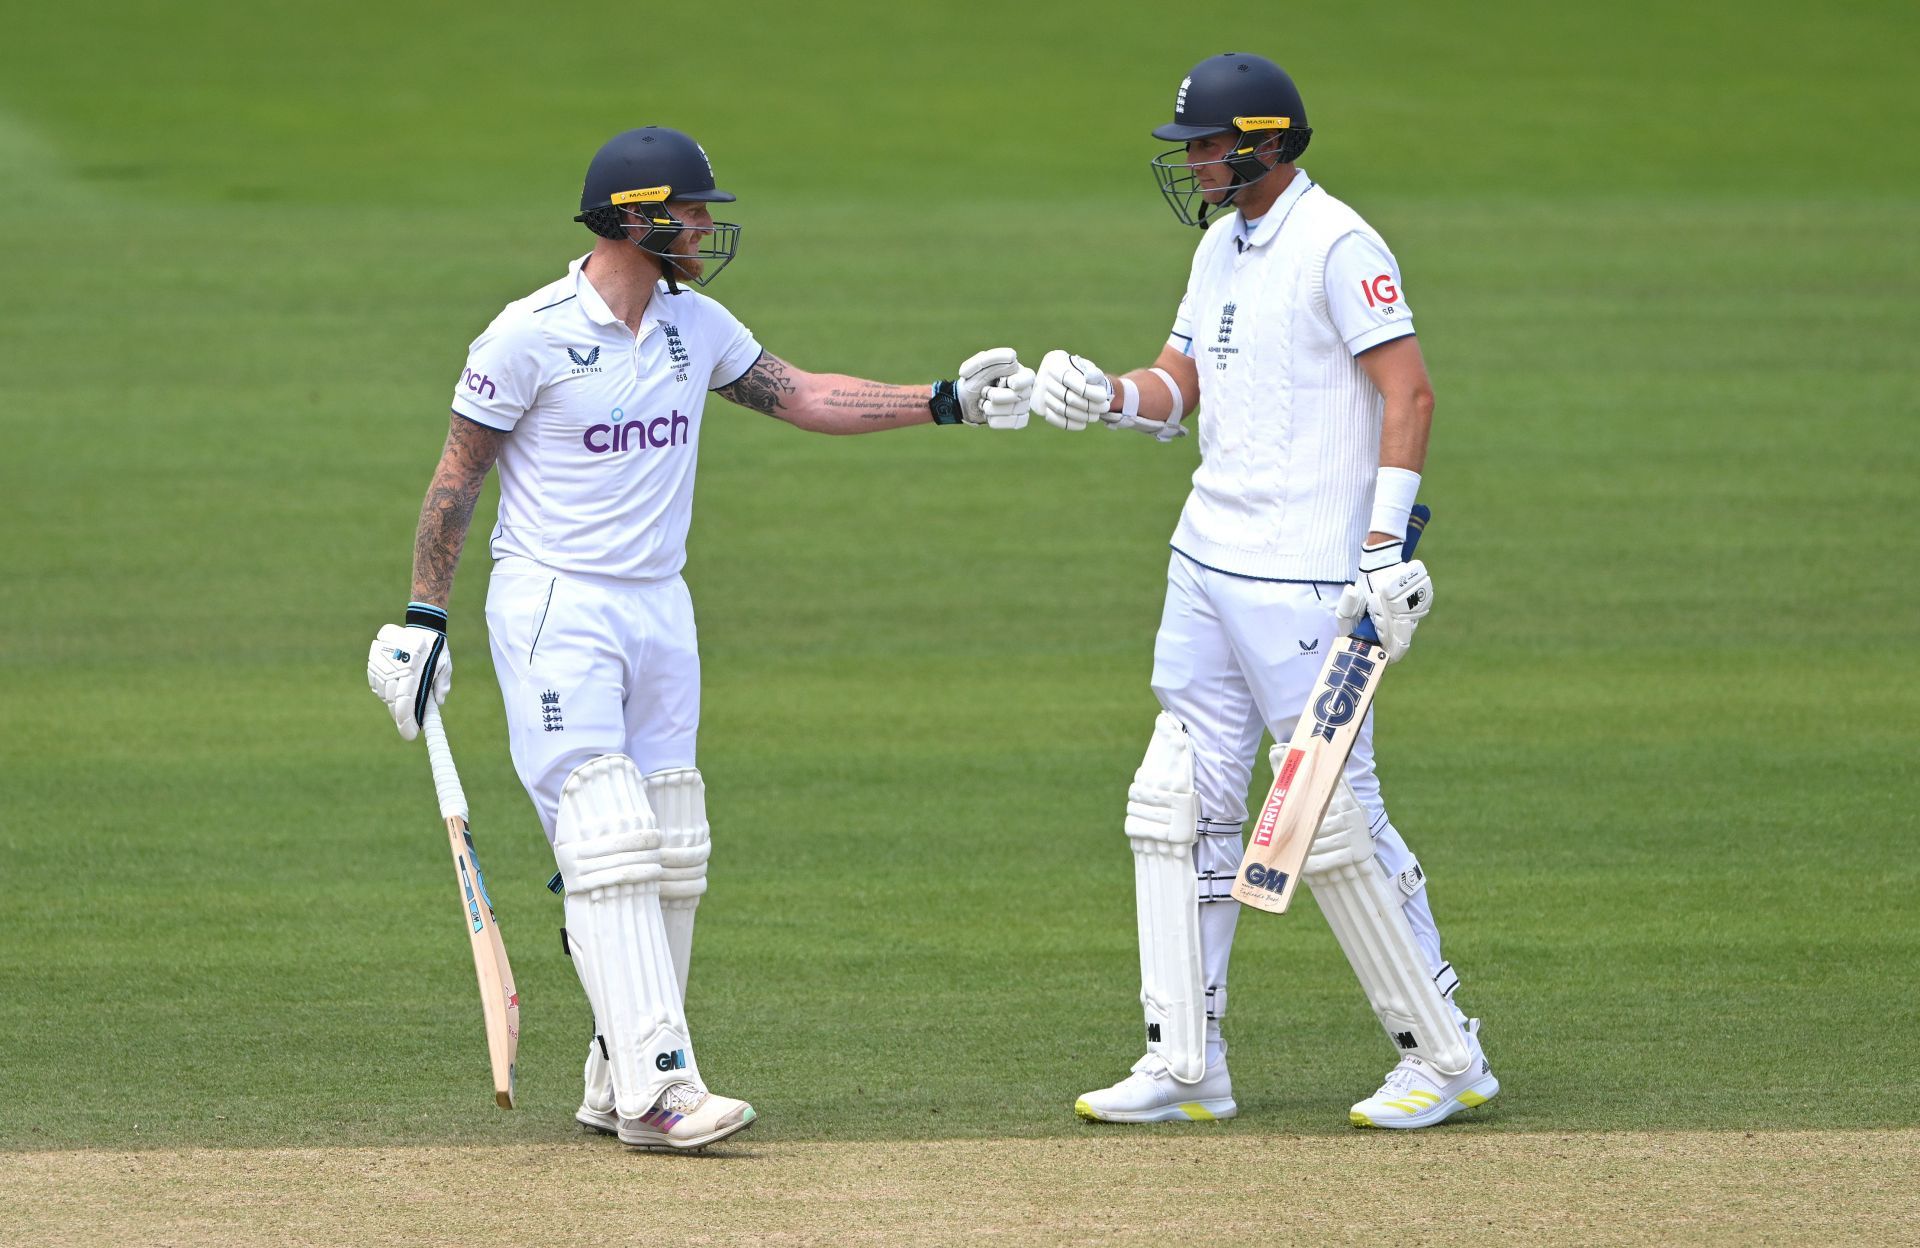 Ben Stokes changed gears after being joined by Stuart Broad at the crease.